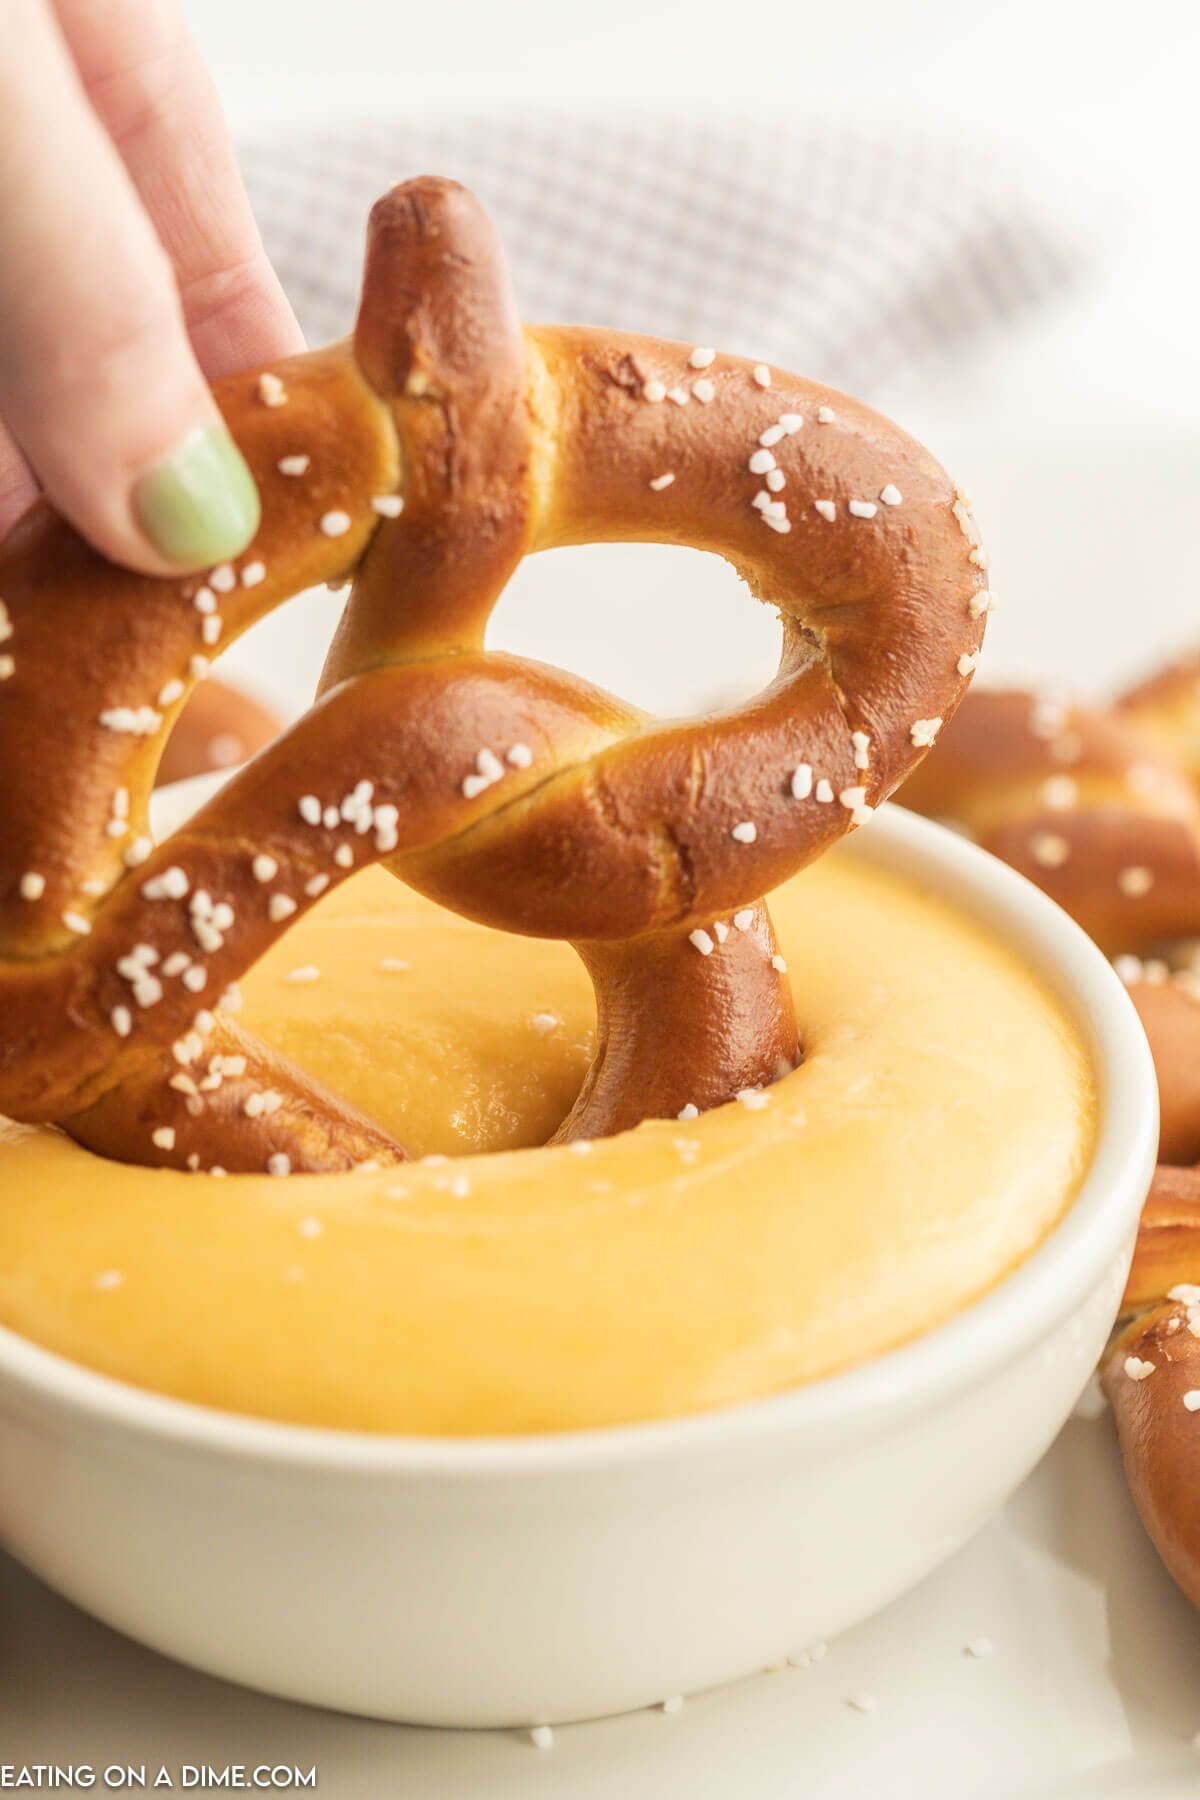 Dipping pretzels in a bowl of cheese dip